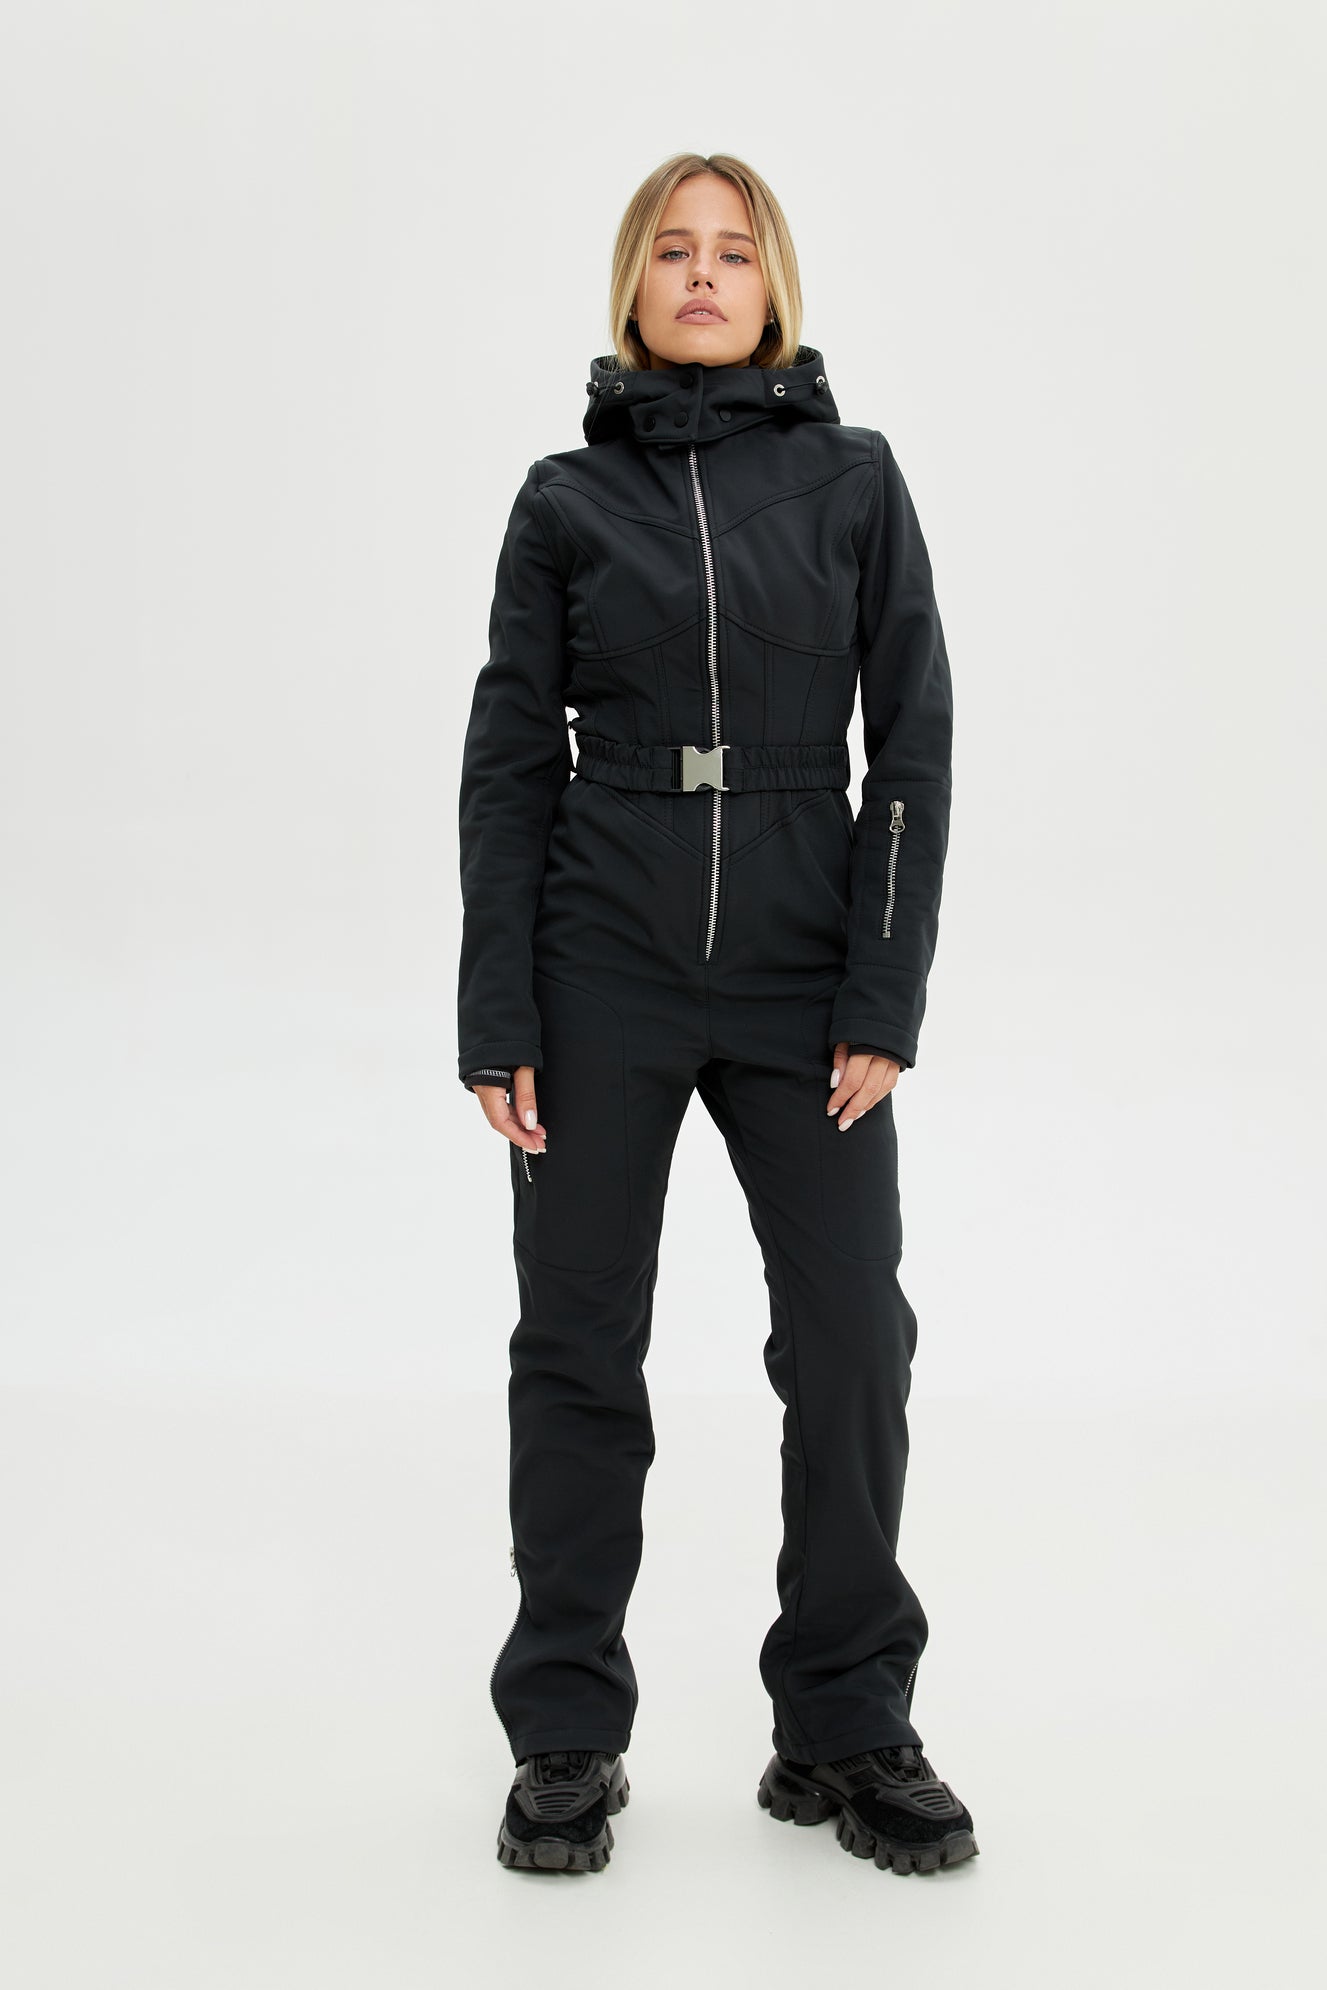 Ski suit womens WHITNEY - WITH SIDE LINES ski outfits – UpWearAndSuits